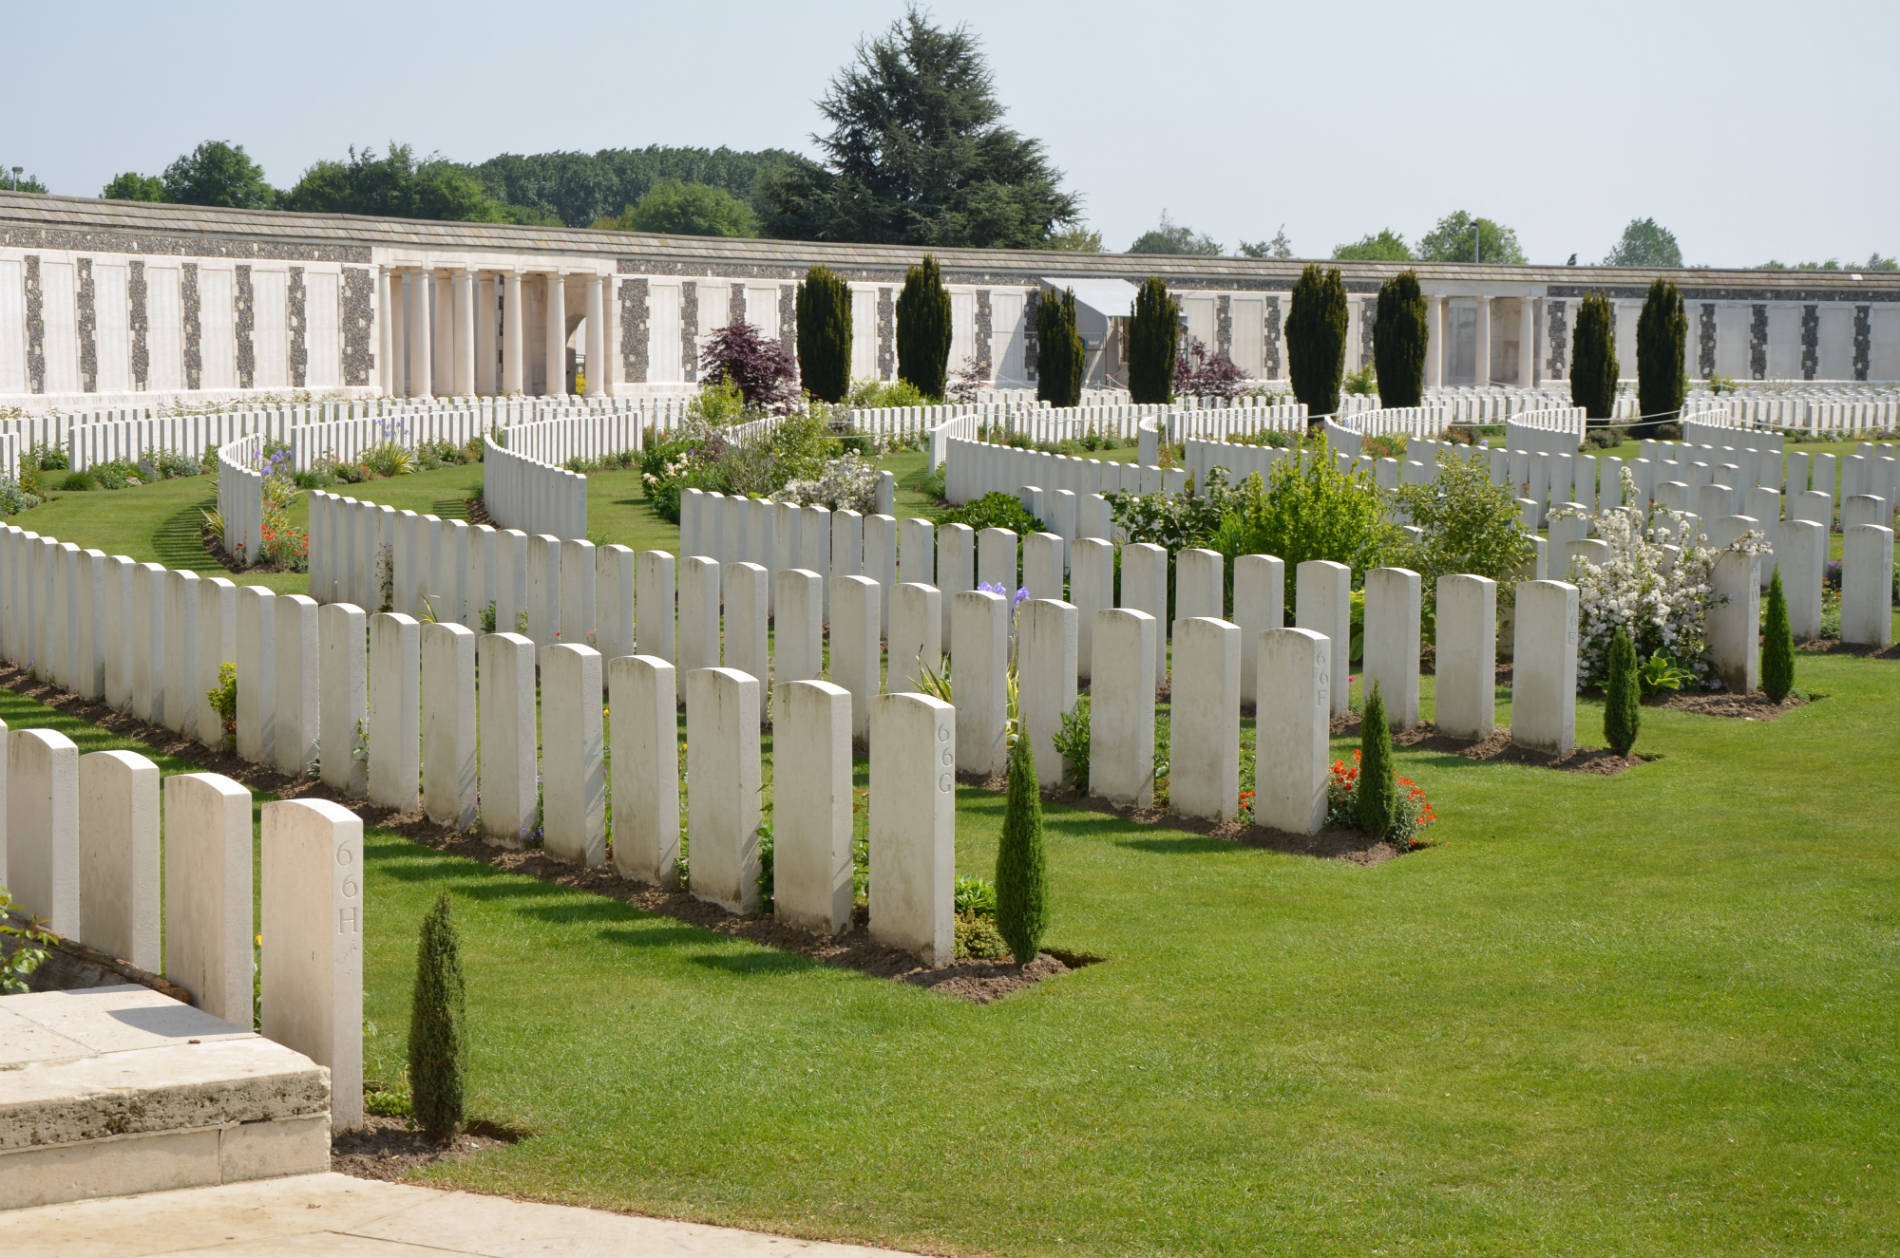 The graves of Tyne Cot cemetery.